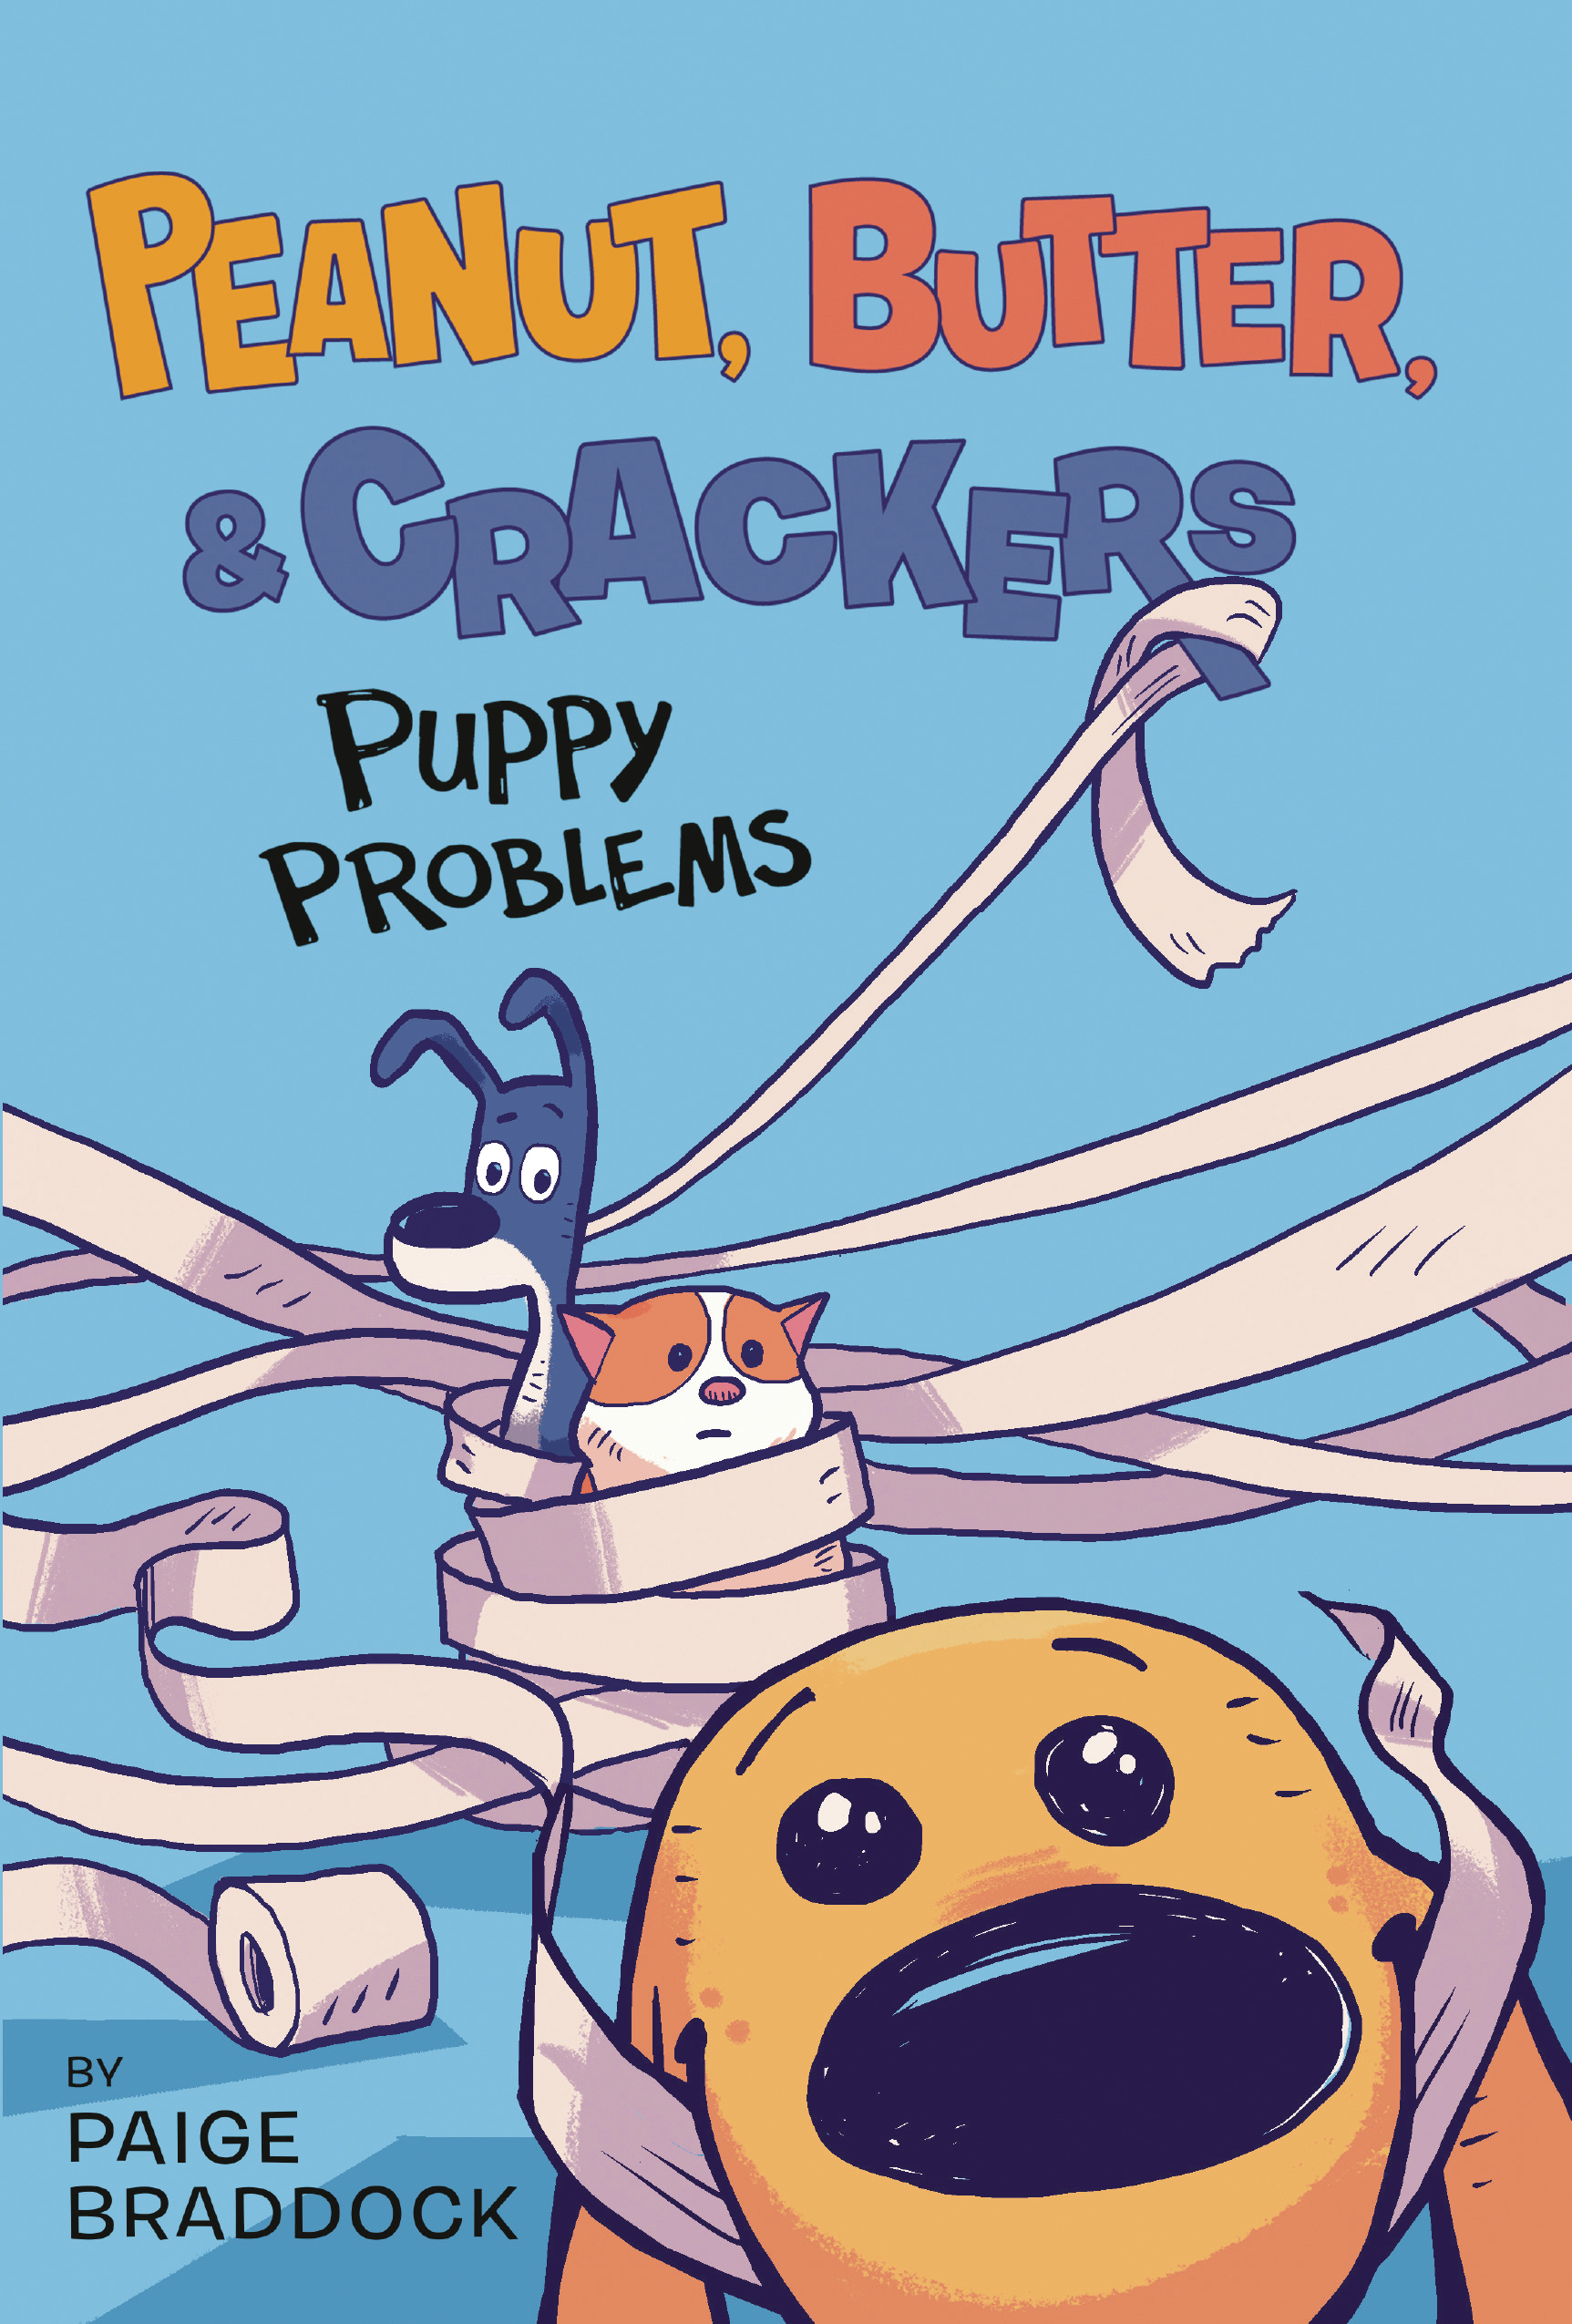 Peanut Butter & Crackers Young Reader Graphic Novel Volume 1 Puppy Problems